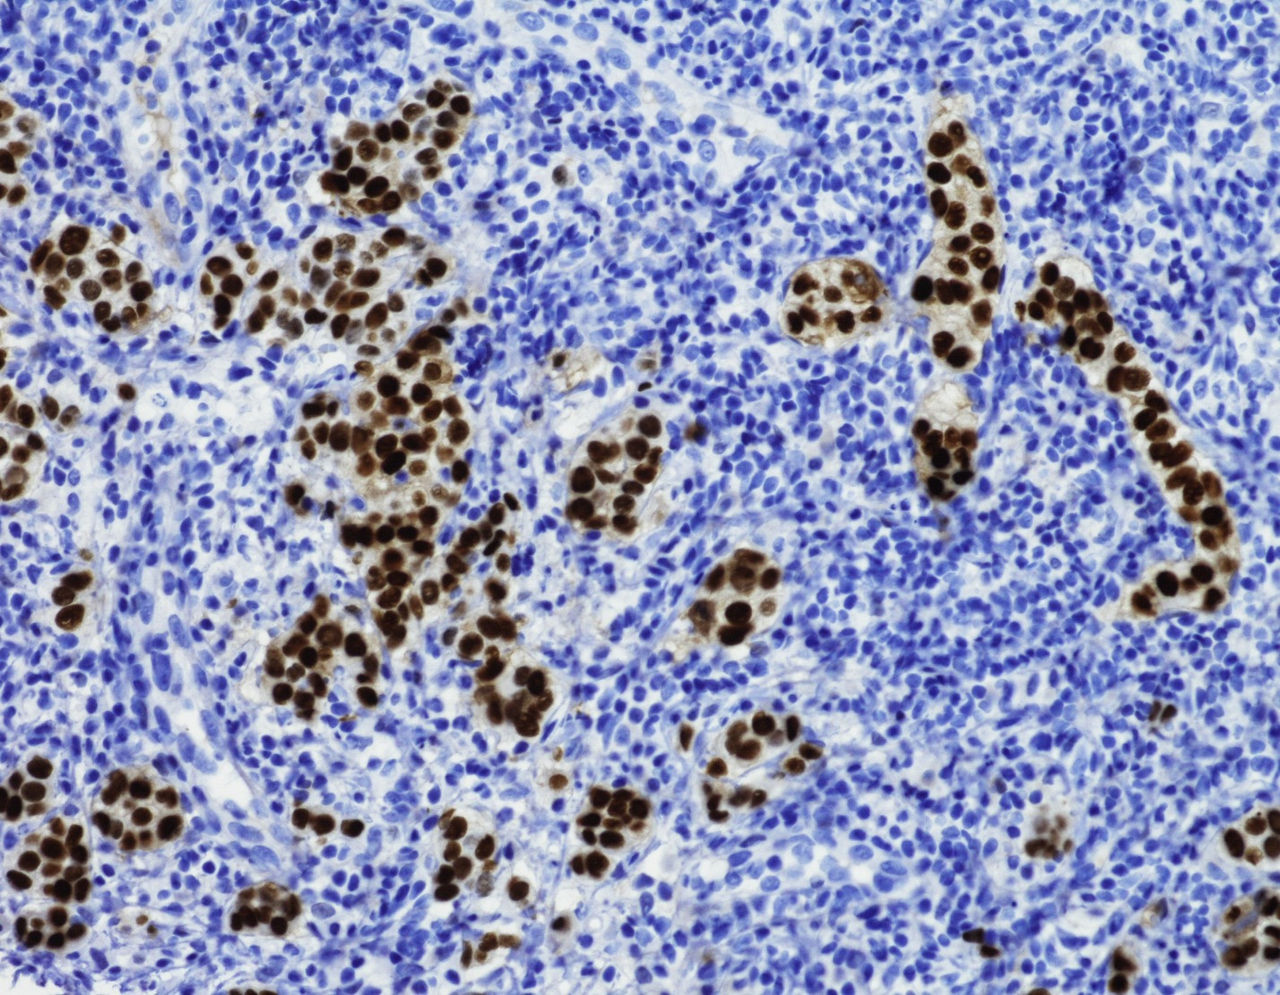 Cells showing metastatic breast cancer to lymph node